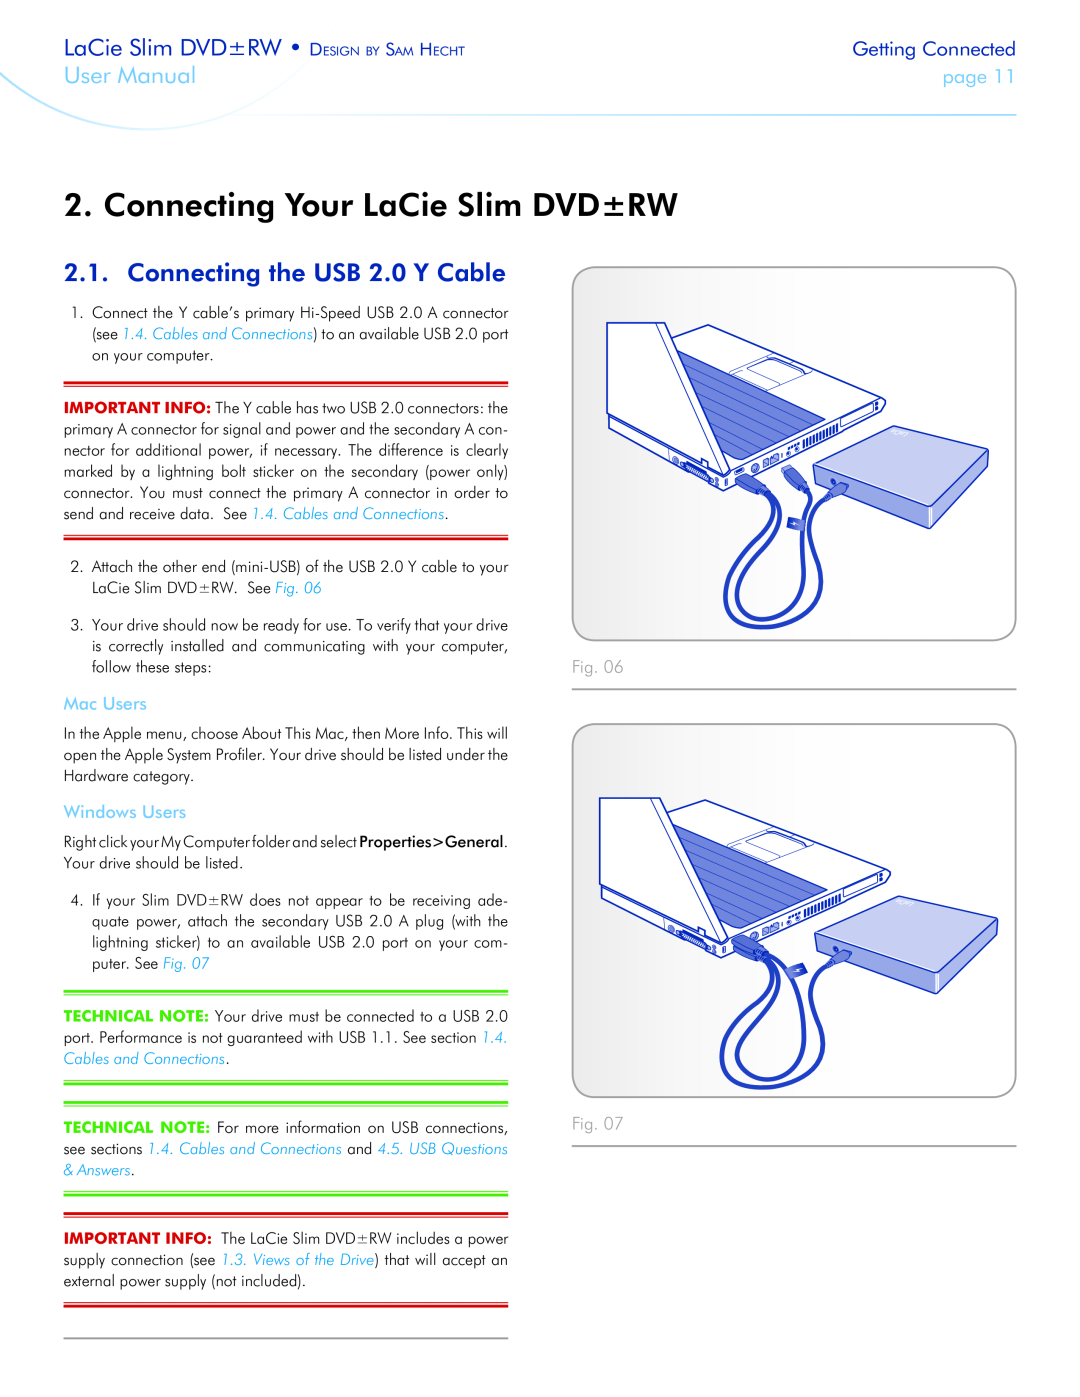 LaCie 301910 Connecting Your LaCie Slim DVD±RW, Connecting the USB 2.0 Y Cable, Getting Connected, Mac Users, User Manual 